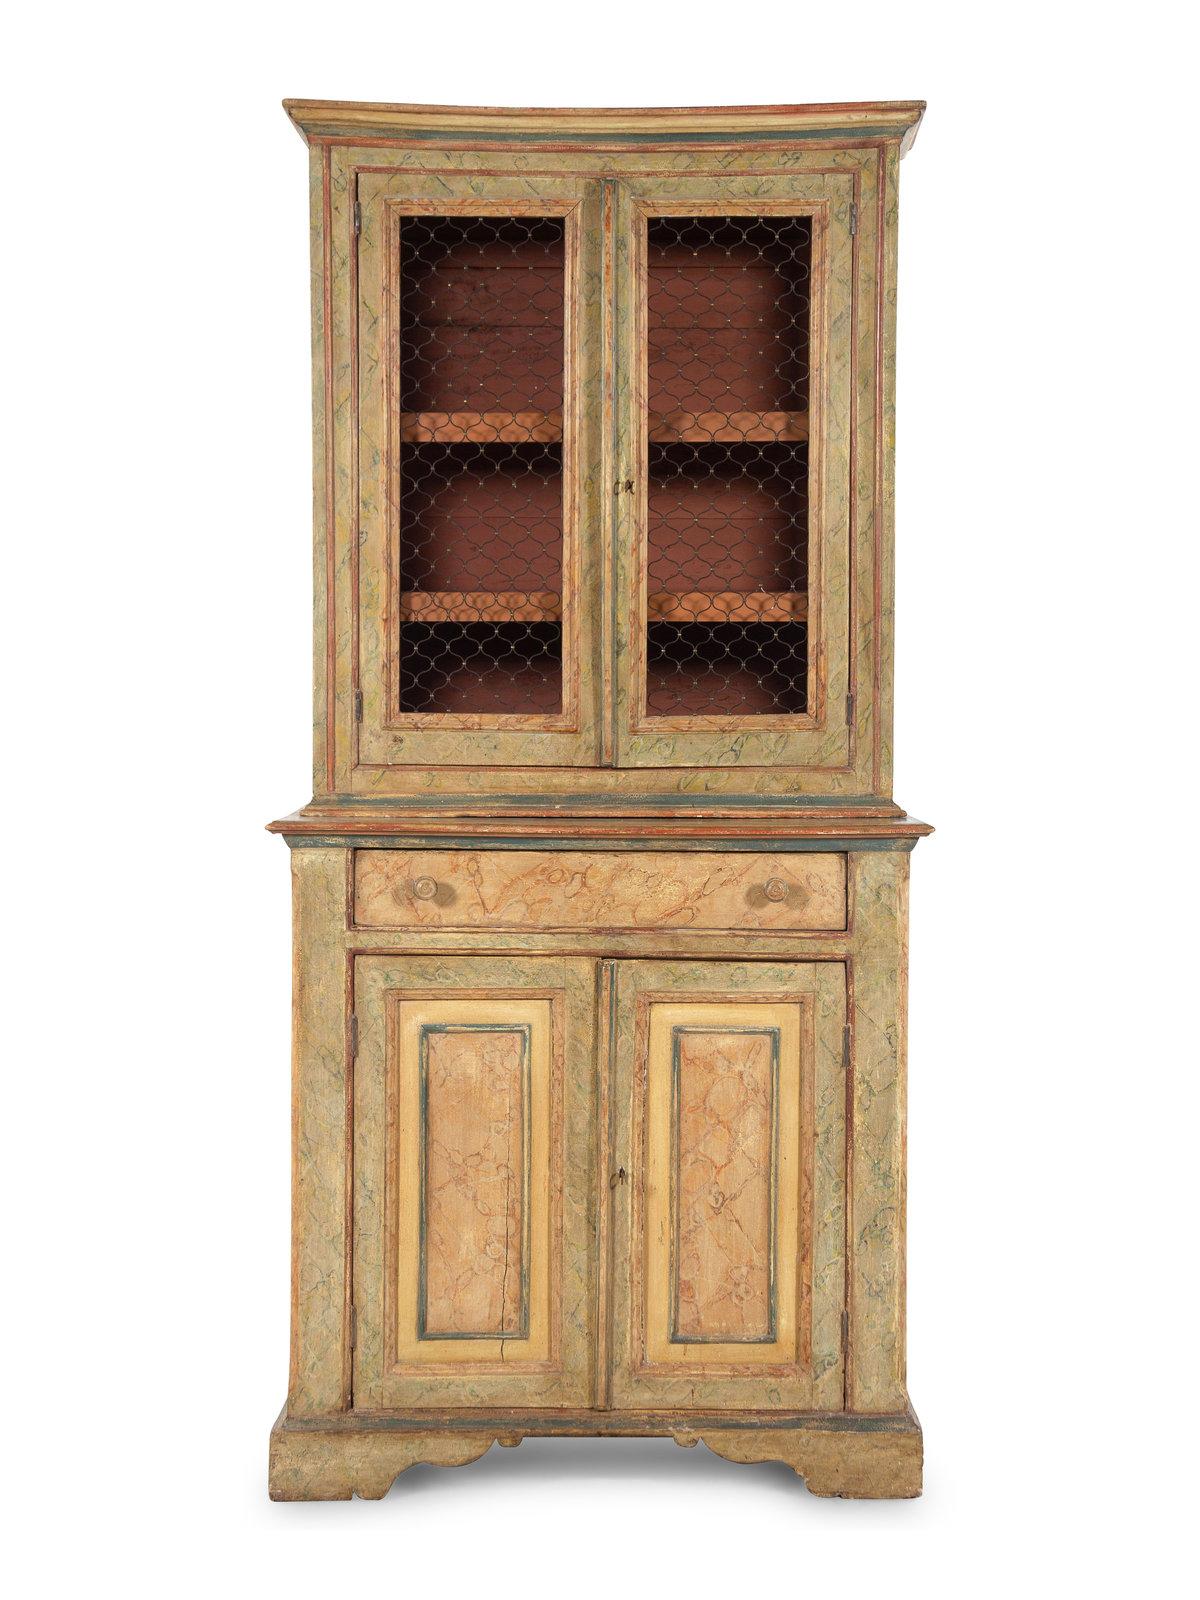 Italian Painted Cupboard or Bookcase, Late 18th Century fitted with a center drawer, top section for display with chicken wire, and a bottom section for storage